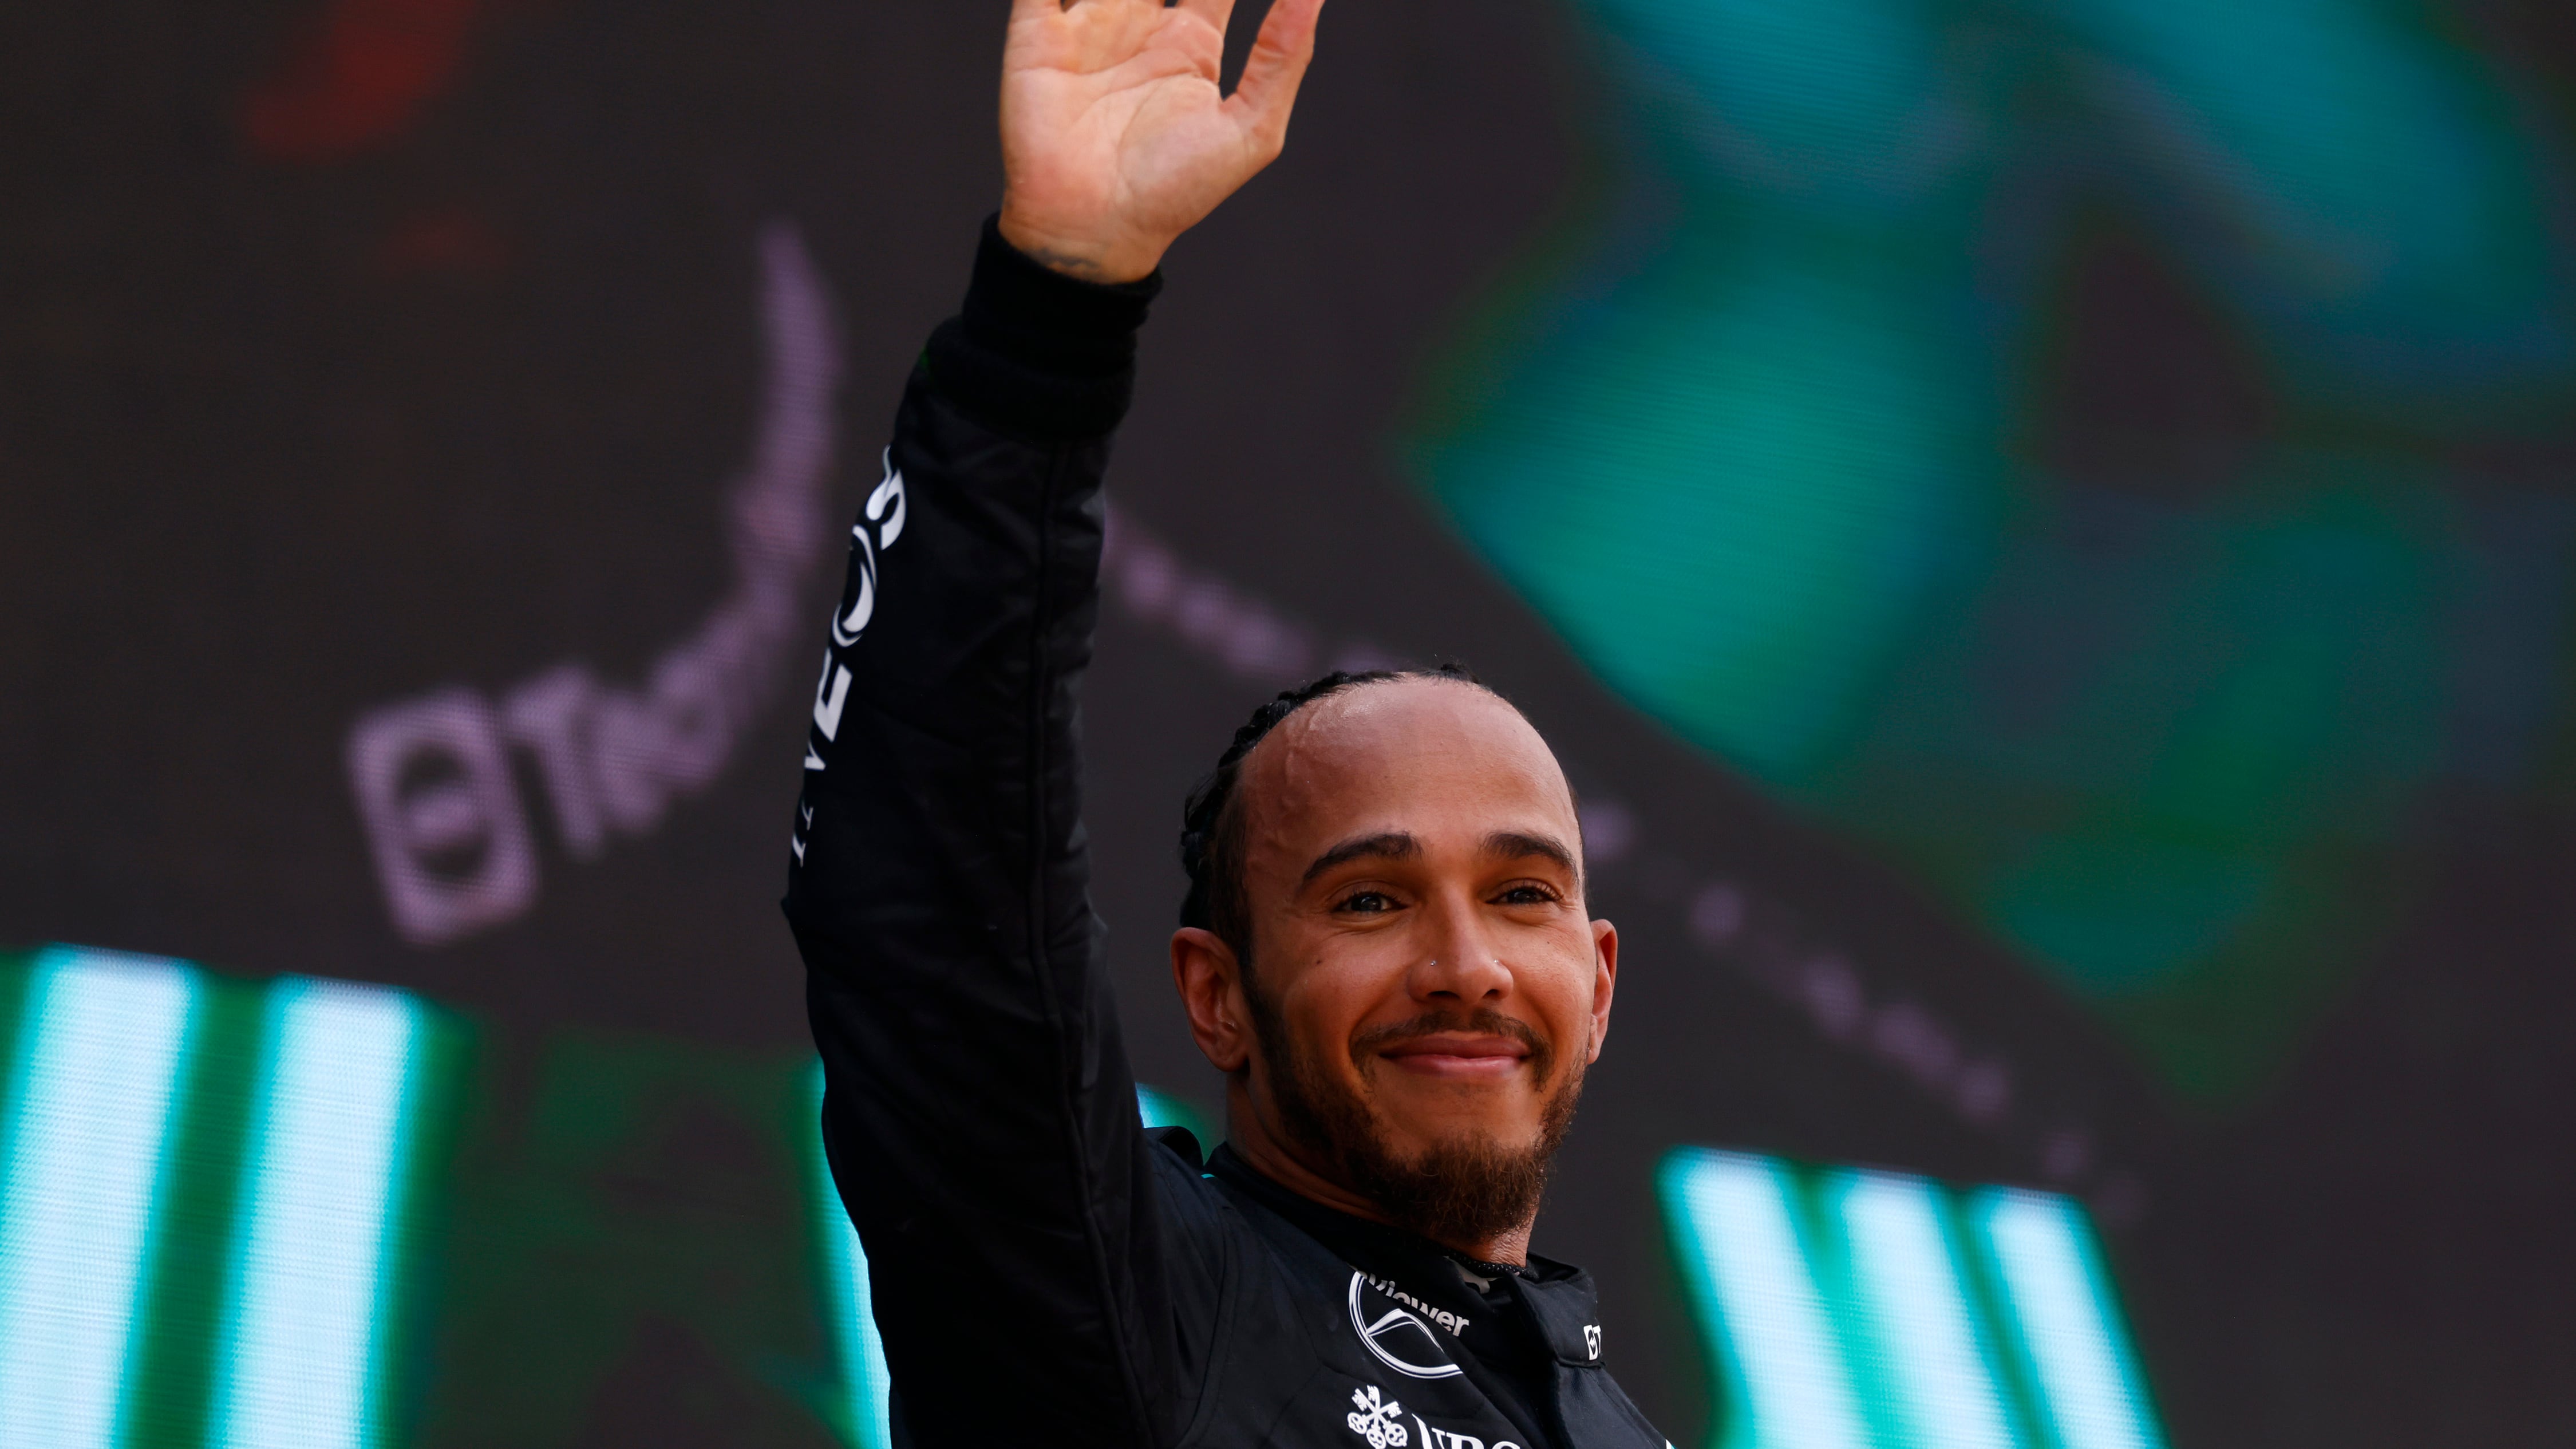 Lewis Hamilton claimed his first podium of the season in Spain on Sunday (Joan Monfort/AP)